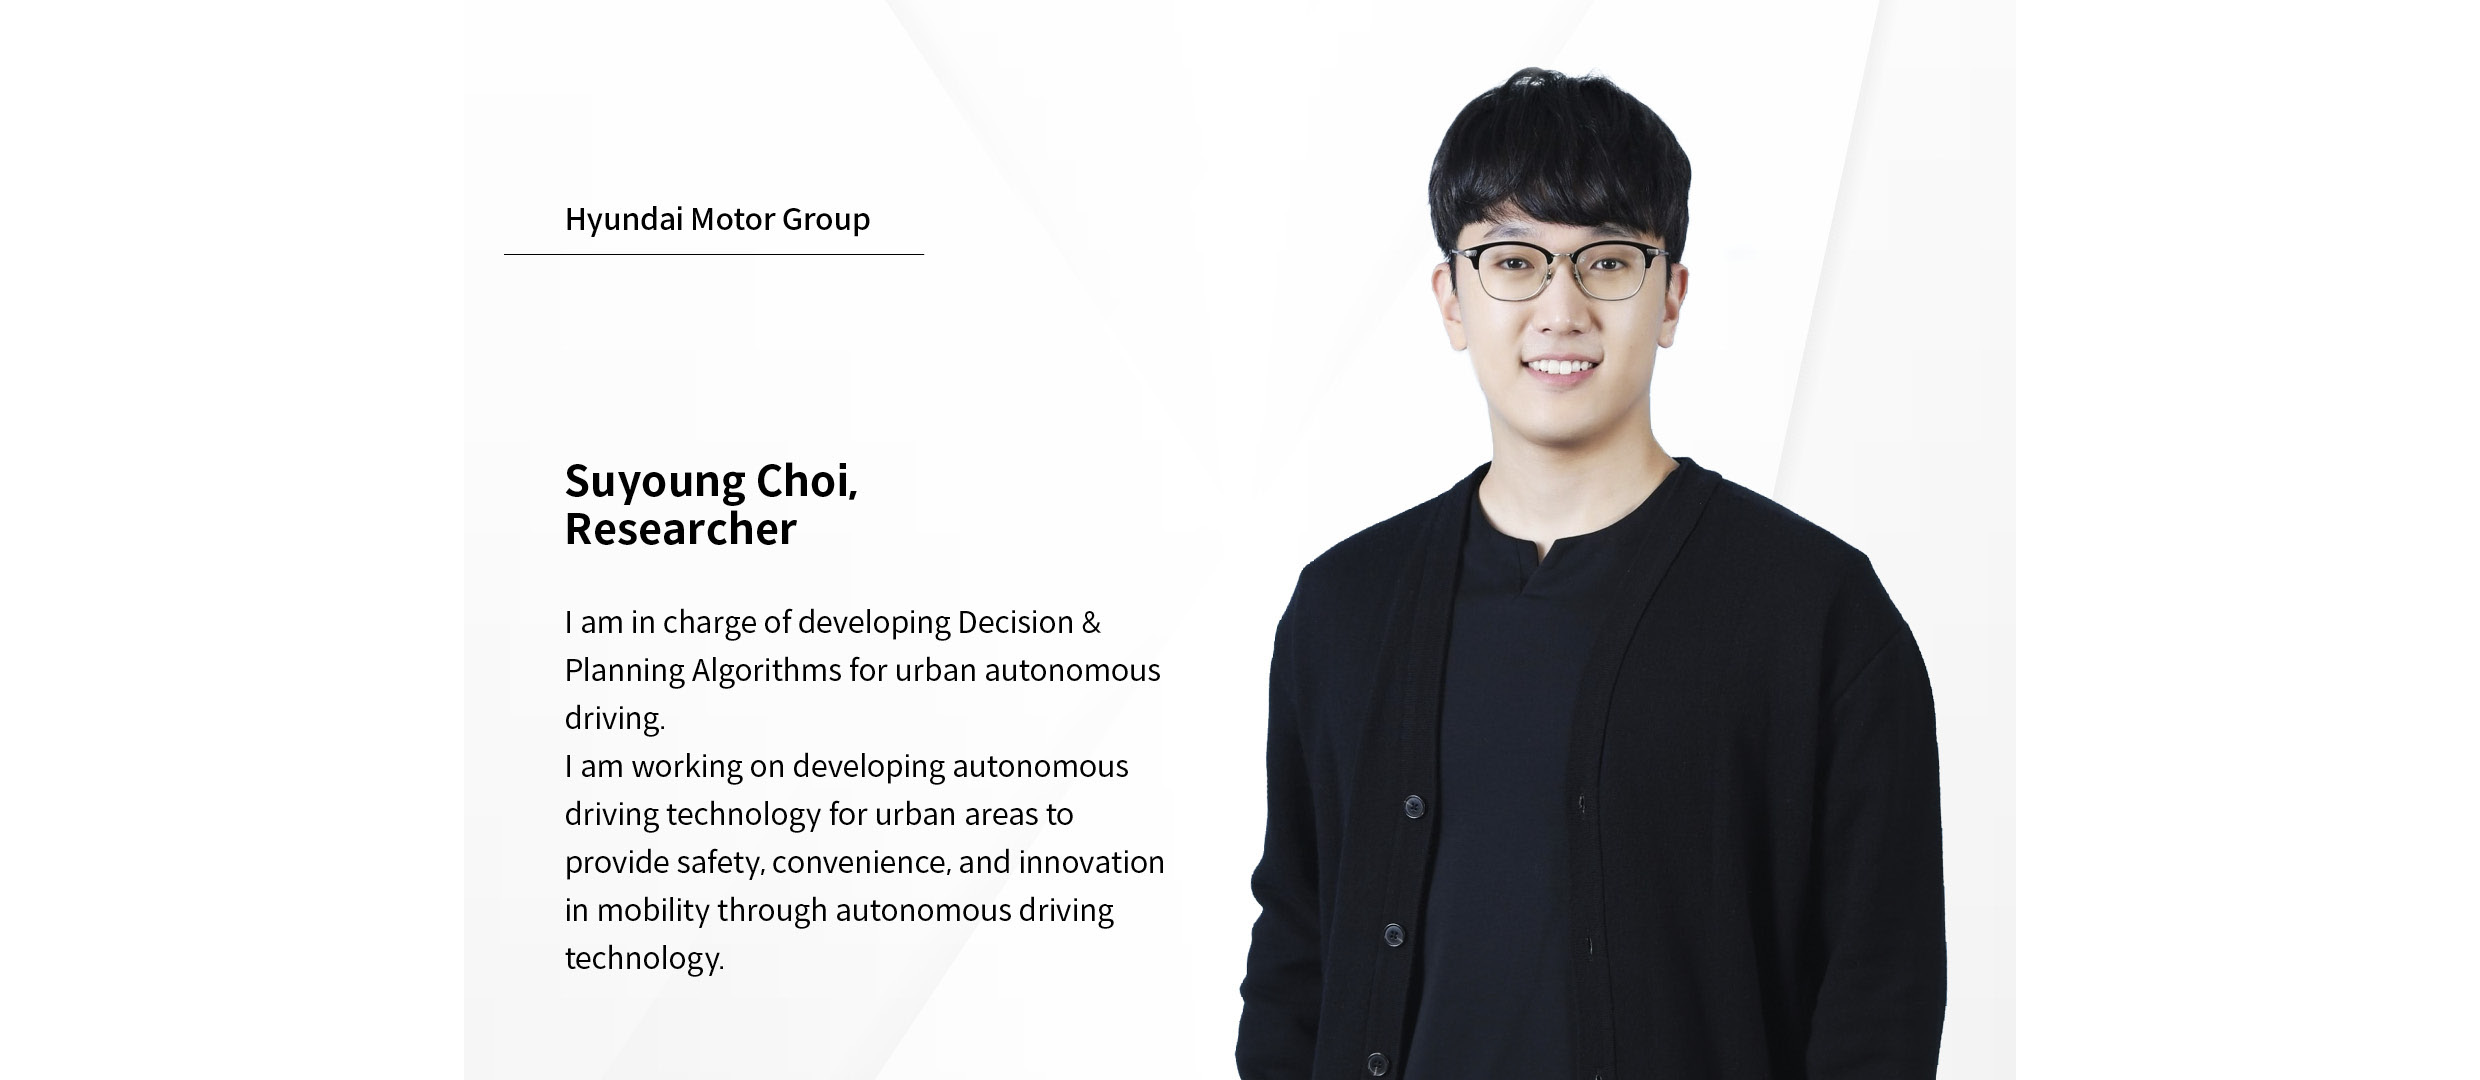 Introduction image of researcher Suyoung Choi